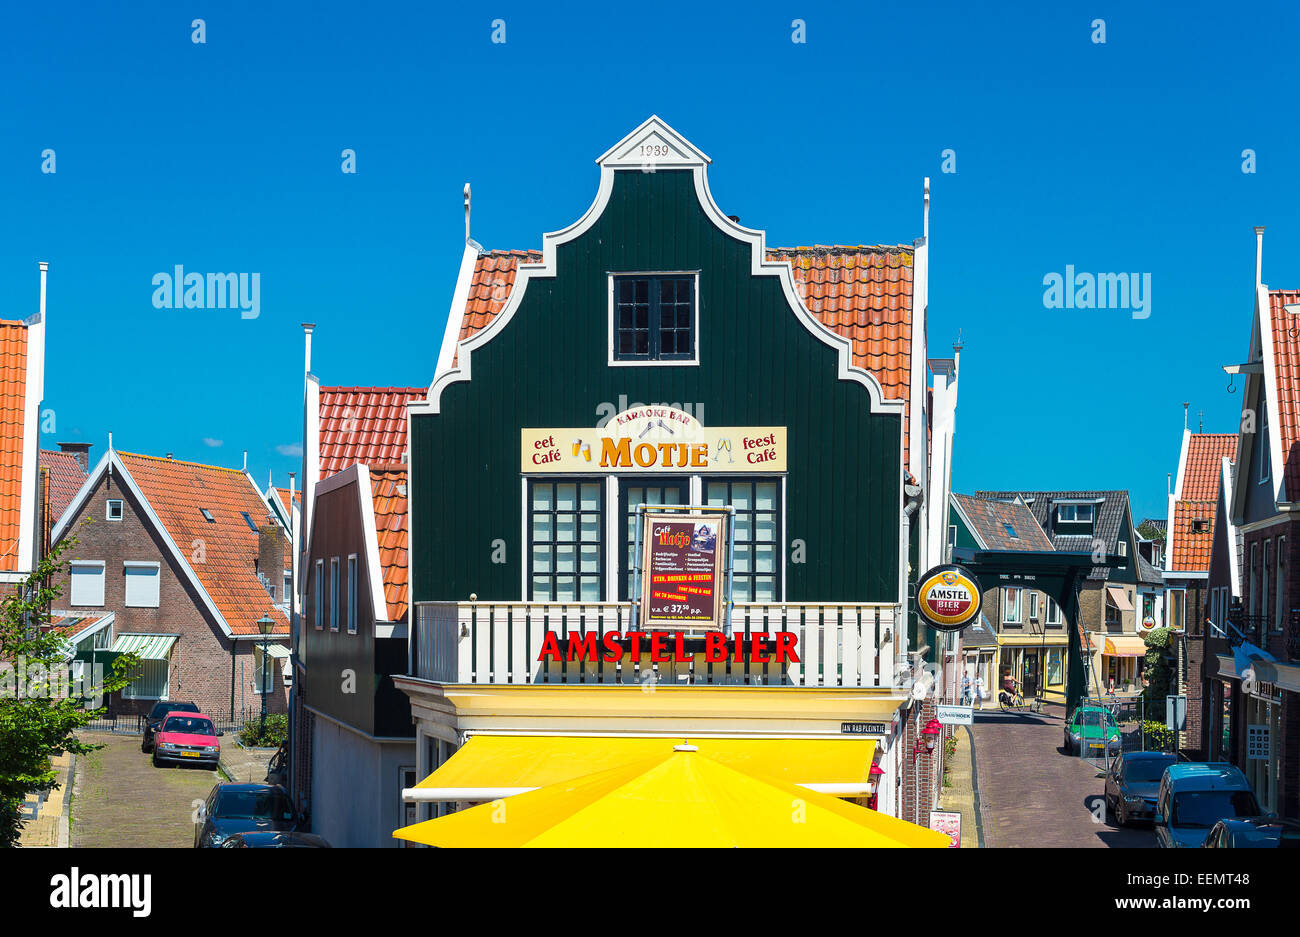 Amsterdam, Waterland district, Volendam, typical houses and shops of the town center Stock Photo